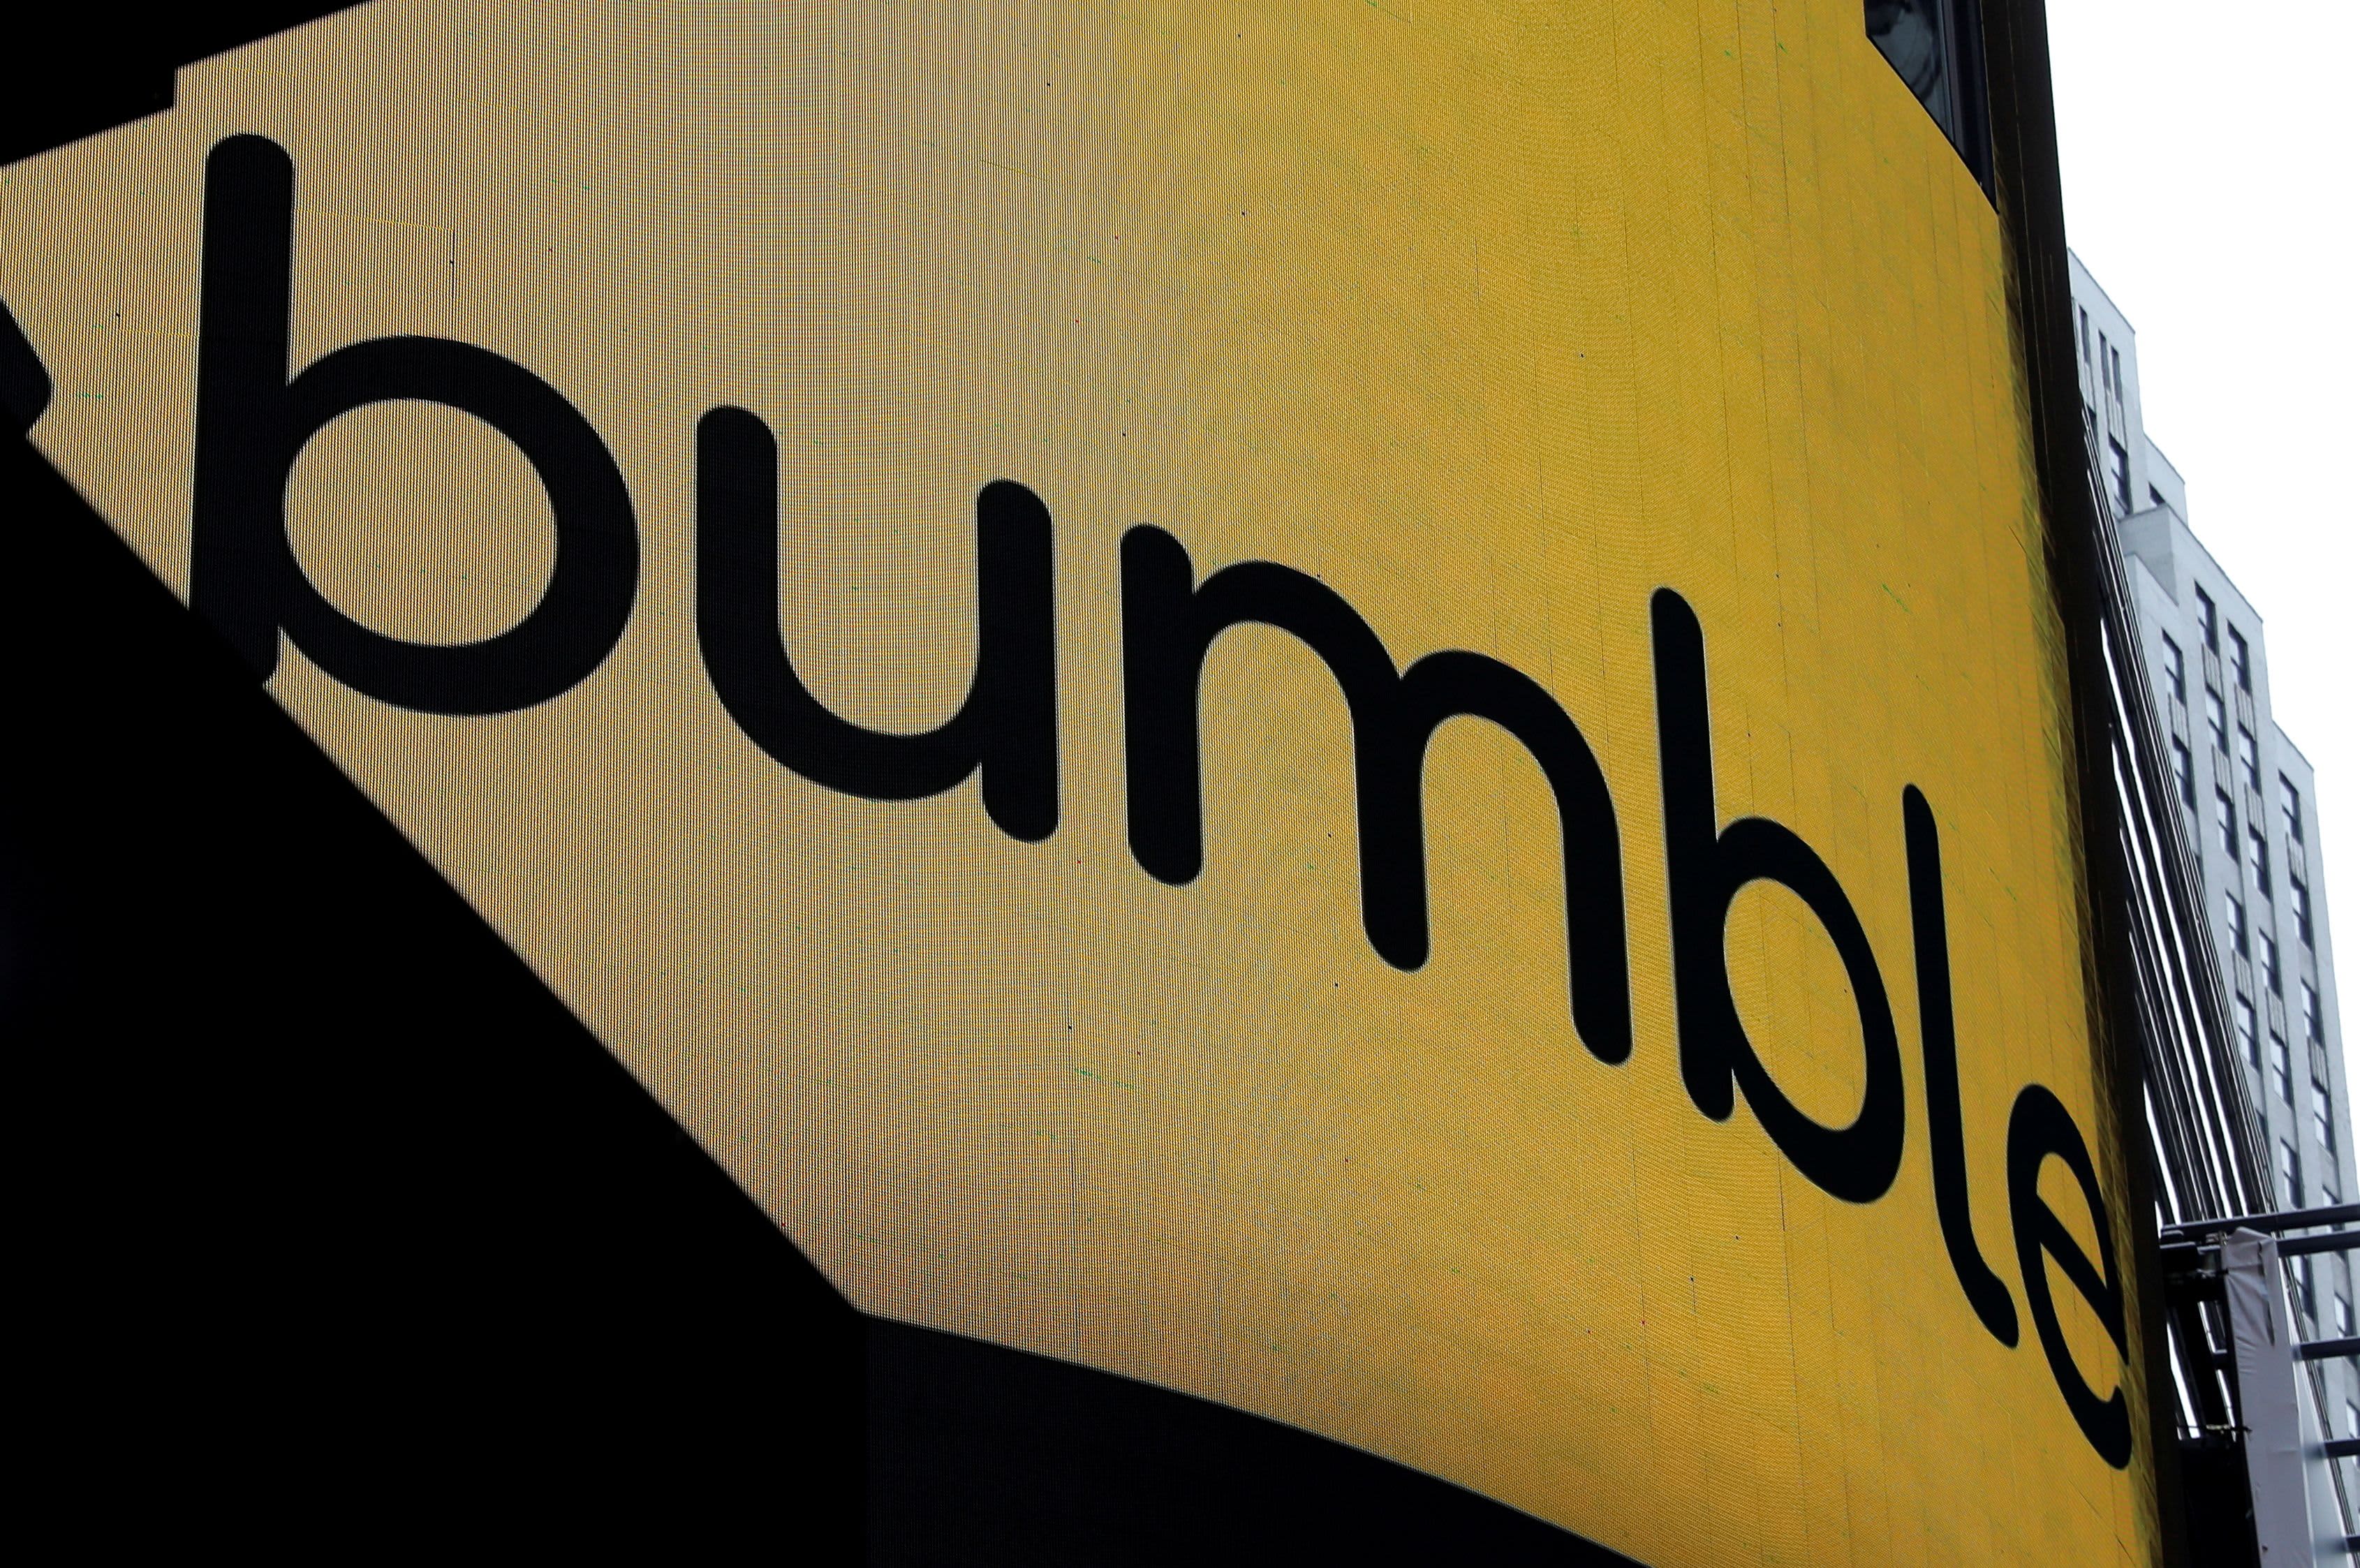 Goldman says to buy online dating stocks Bumble and Match Group, sees huge upside ahead